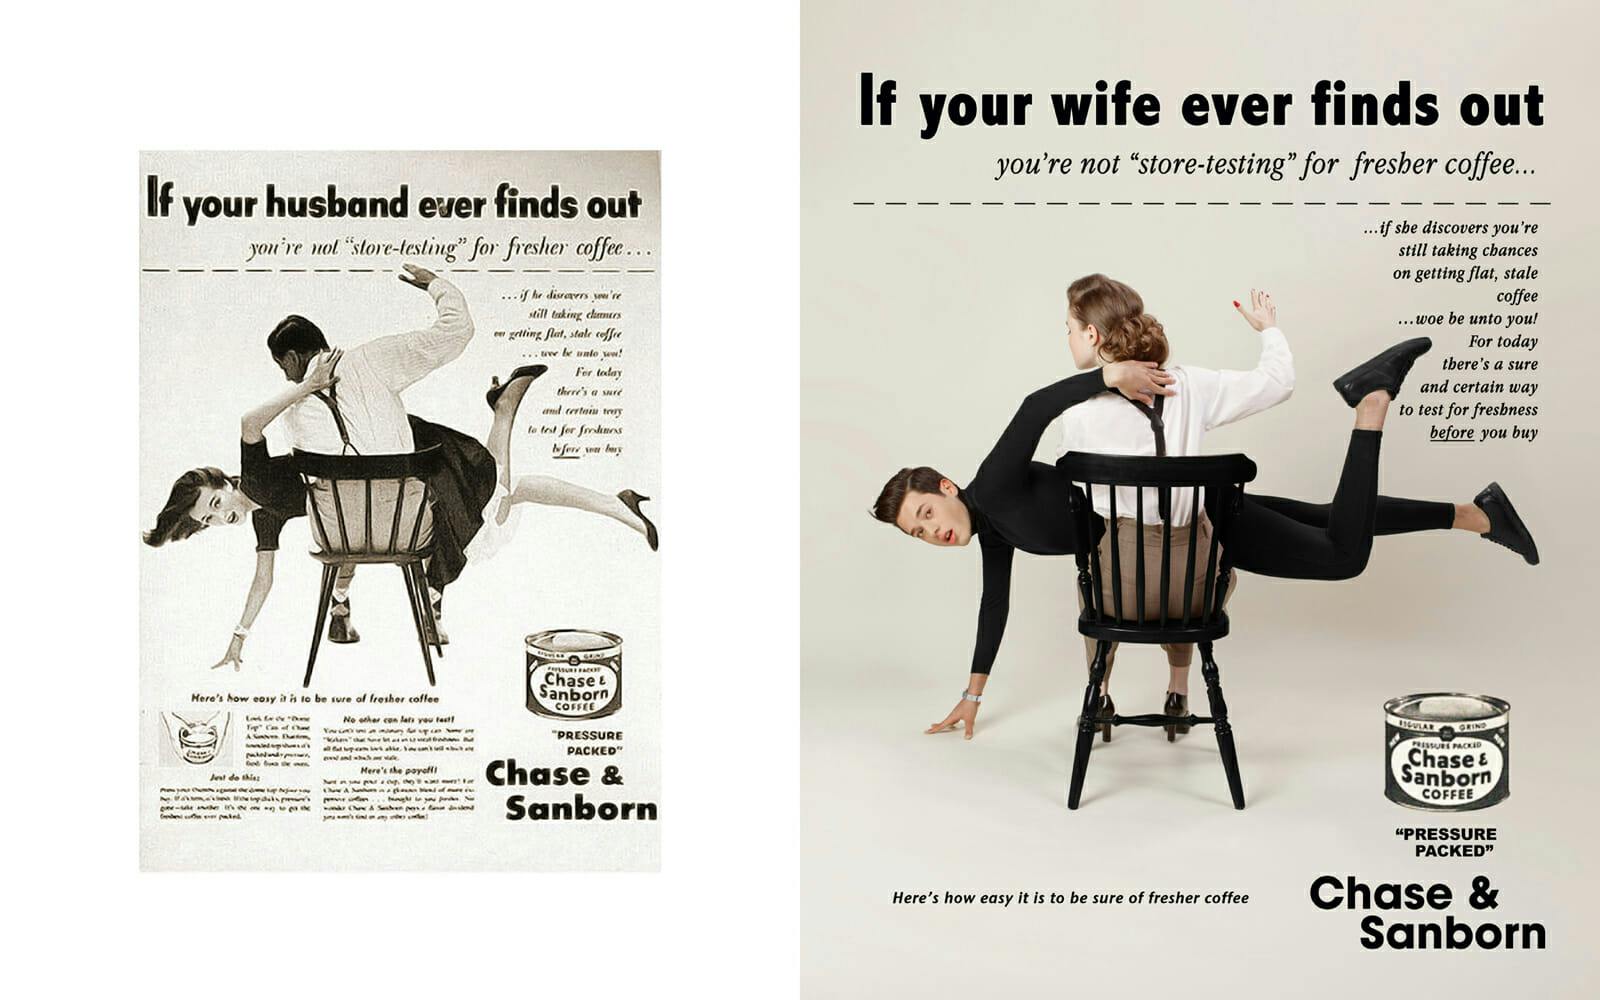 Photo Series Satirizes Vintage Sexist Ads By Switching Gender Roles